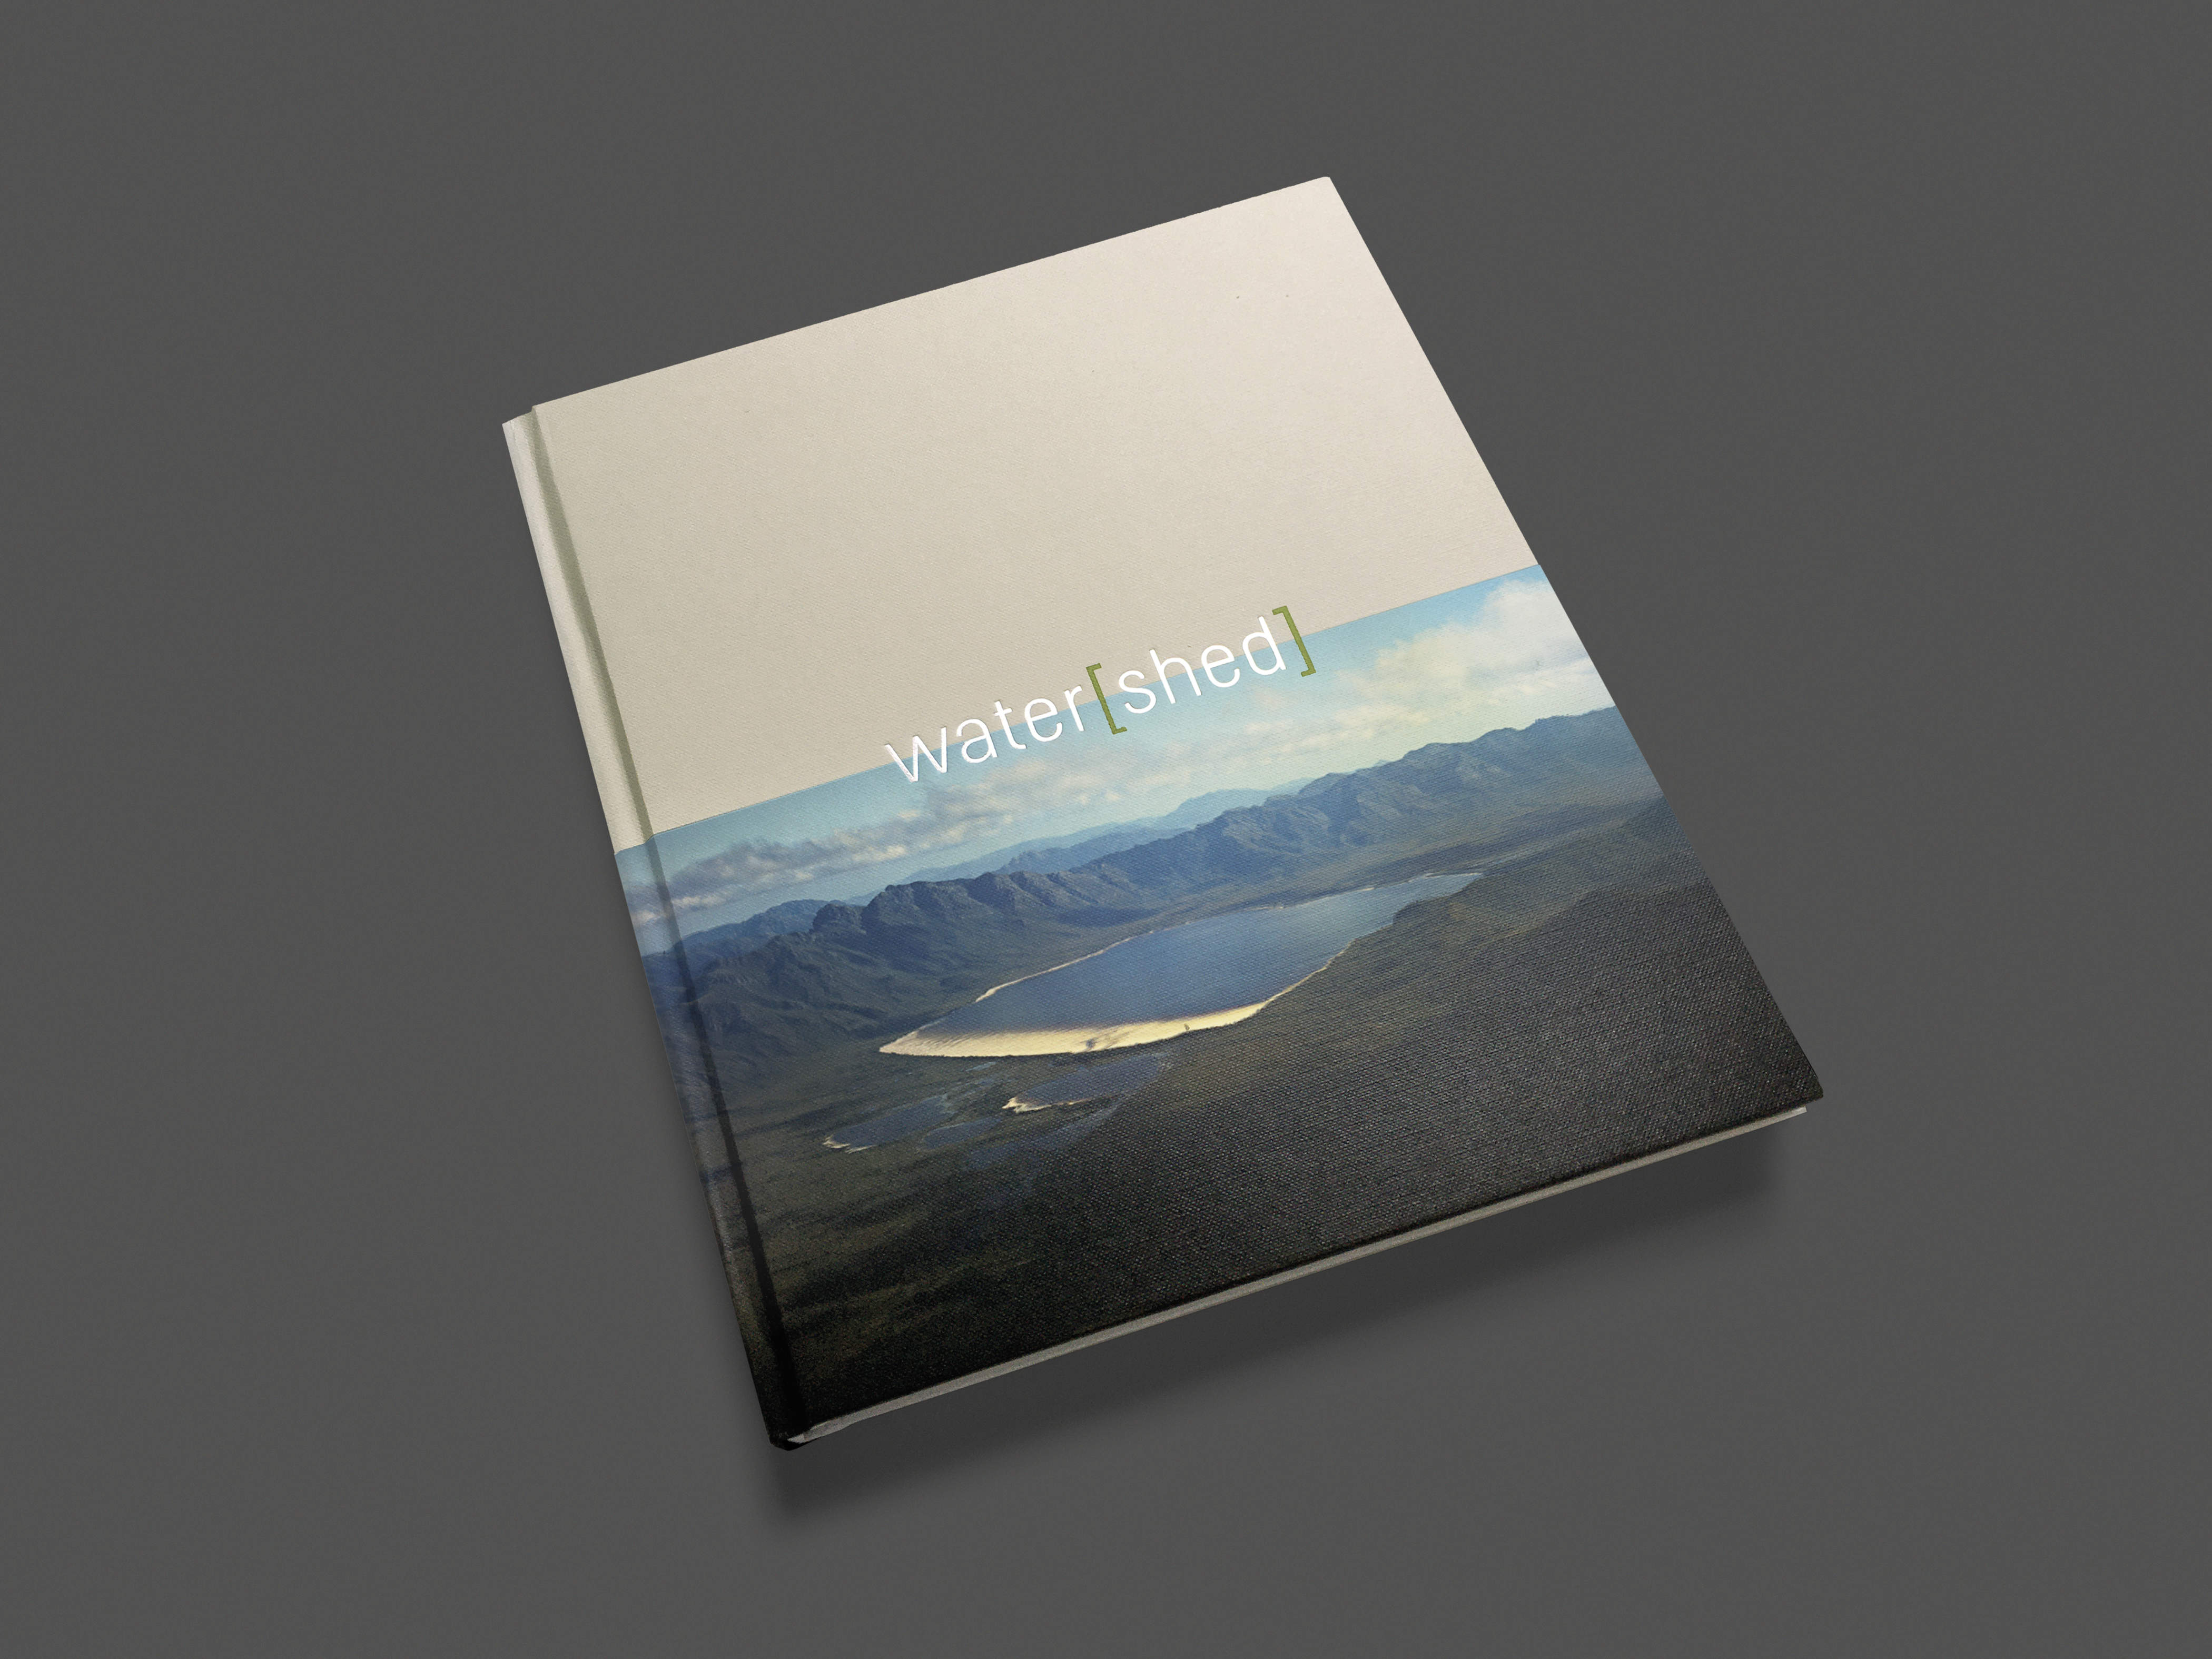 Image of the cover of the water[shed] exhibition publication. The title water[shed] sits in the middle of the cover and is debossed in silver foil and the word ‘shed’ is in bright green square brackets. The top half of the cover is a light grey colour. The bottom half of the cover features a photograph of Lake Pedder, Tasmania, c1970 taken by Wilf Elvey prior to the lake’s inundation by the Huon-Serpentine hydro-electric impoundment.